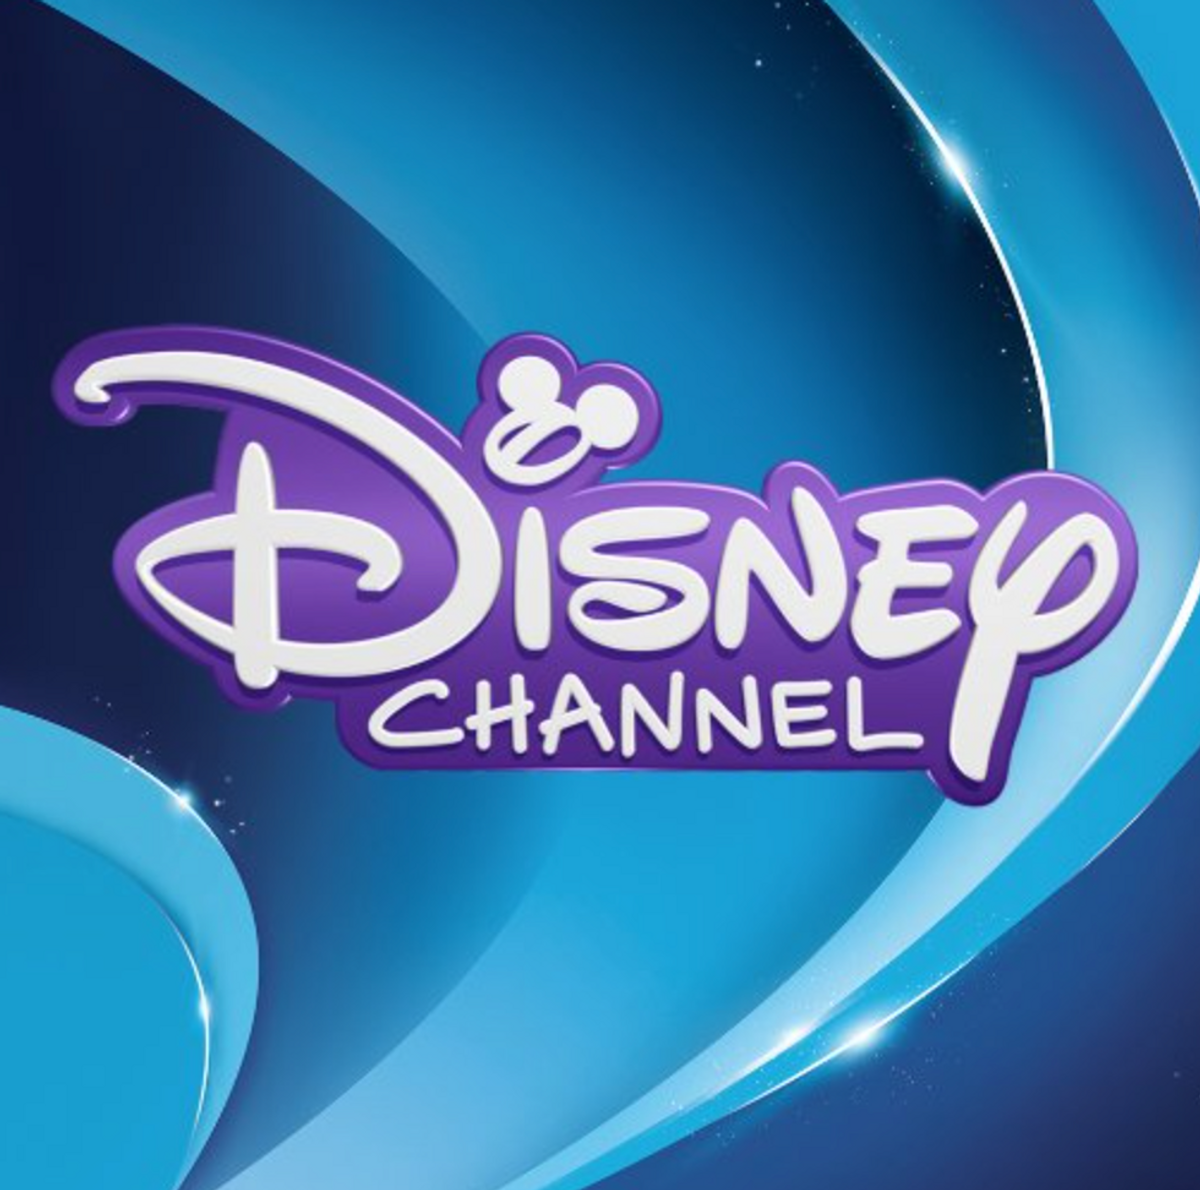 10 Most Popular Disney Shows From The Early 2000s